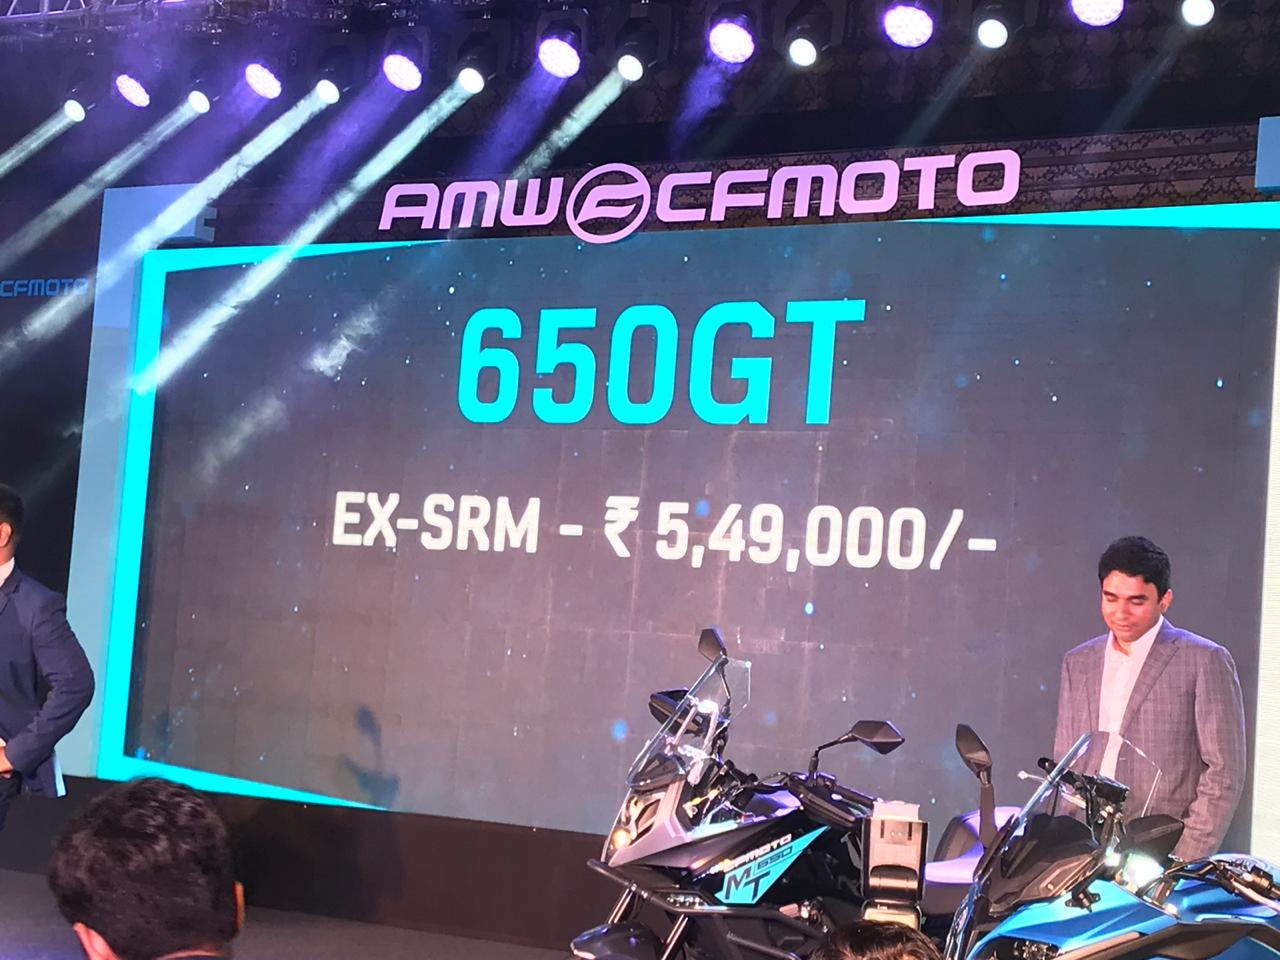 <p>The 650GT will be the flagship for now, priced at Rs 5.49 lakh ex-showroom</p>